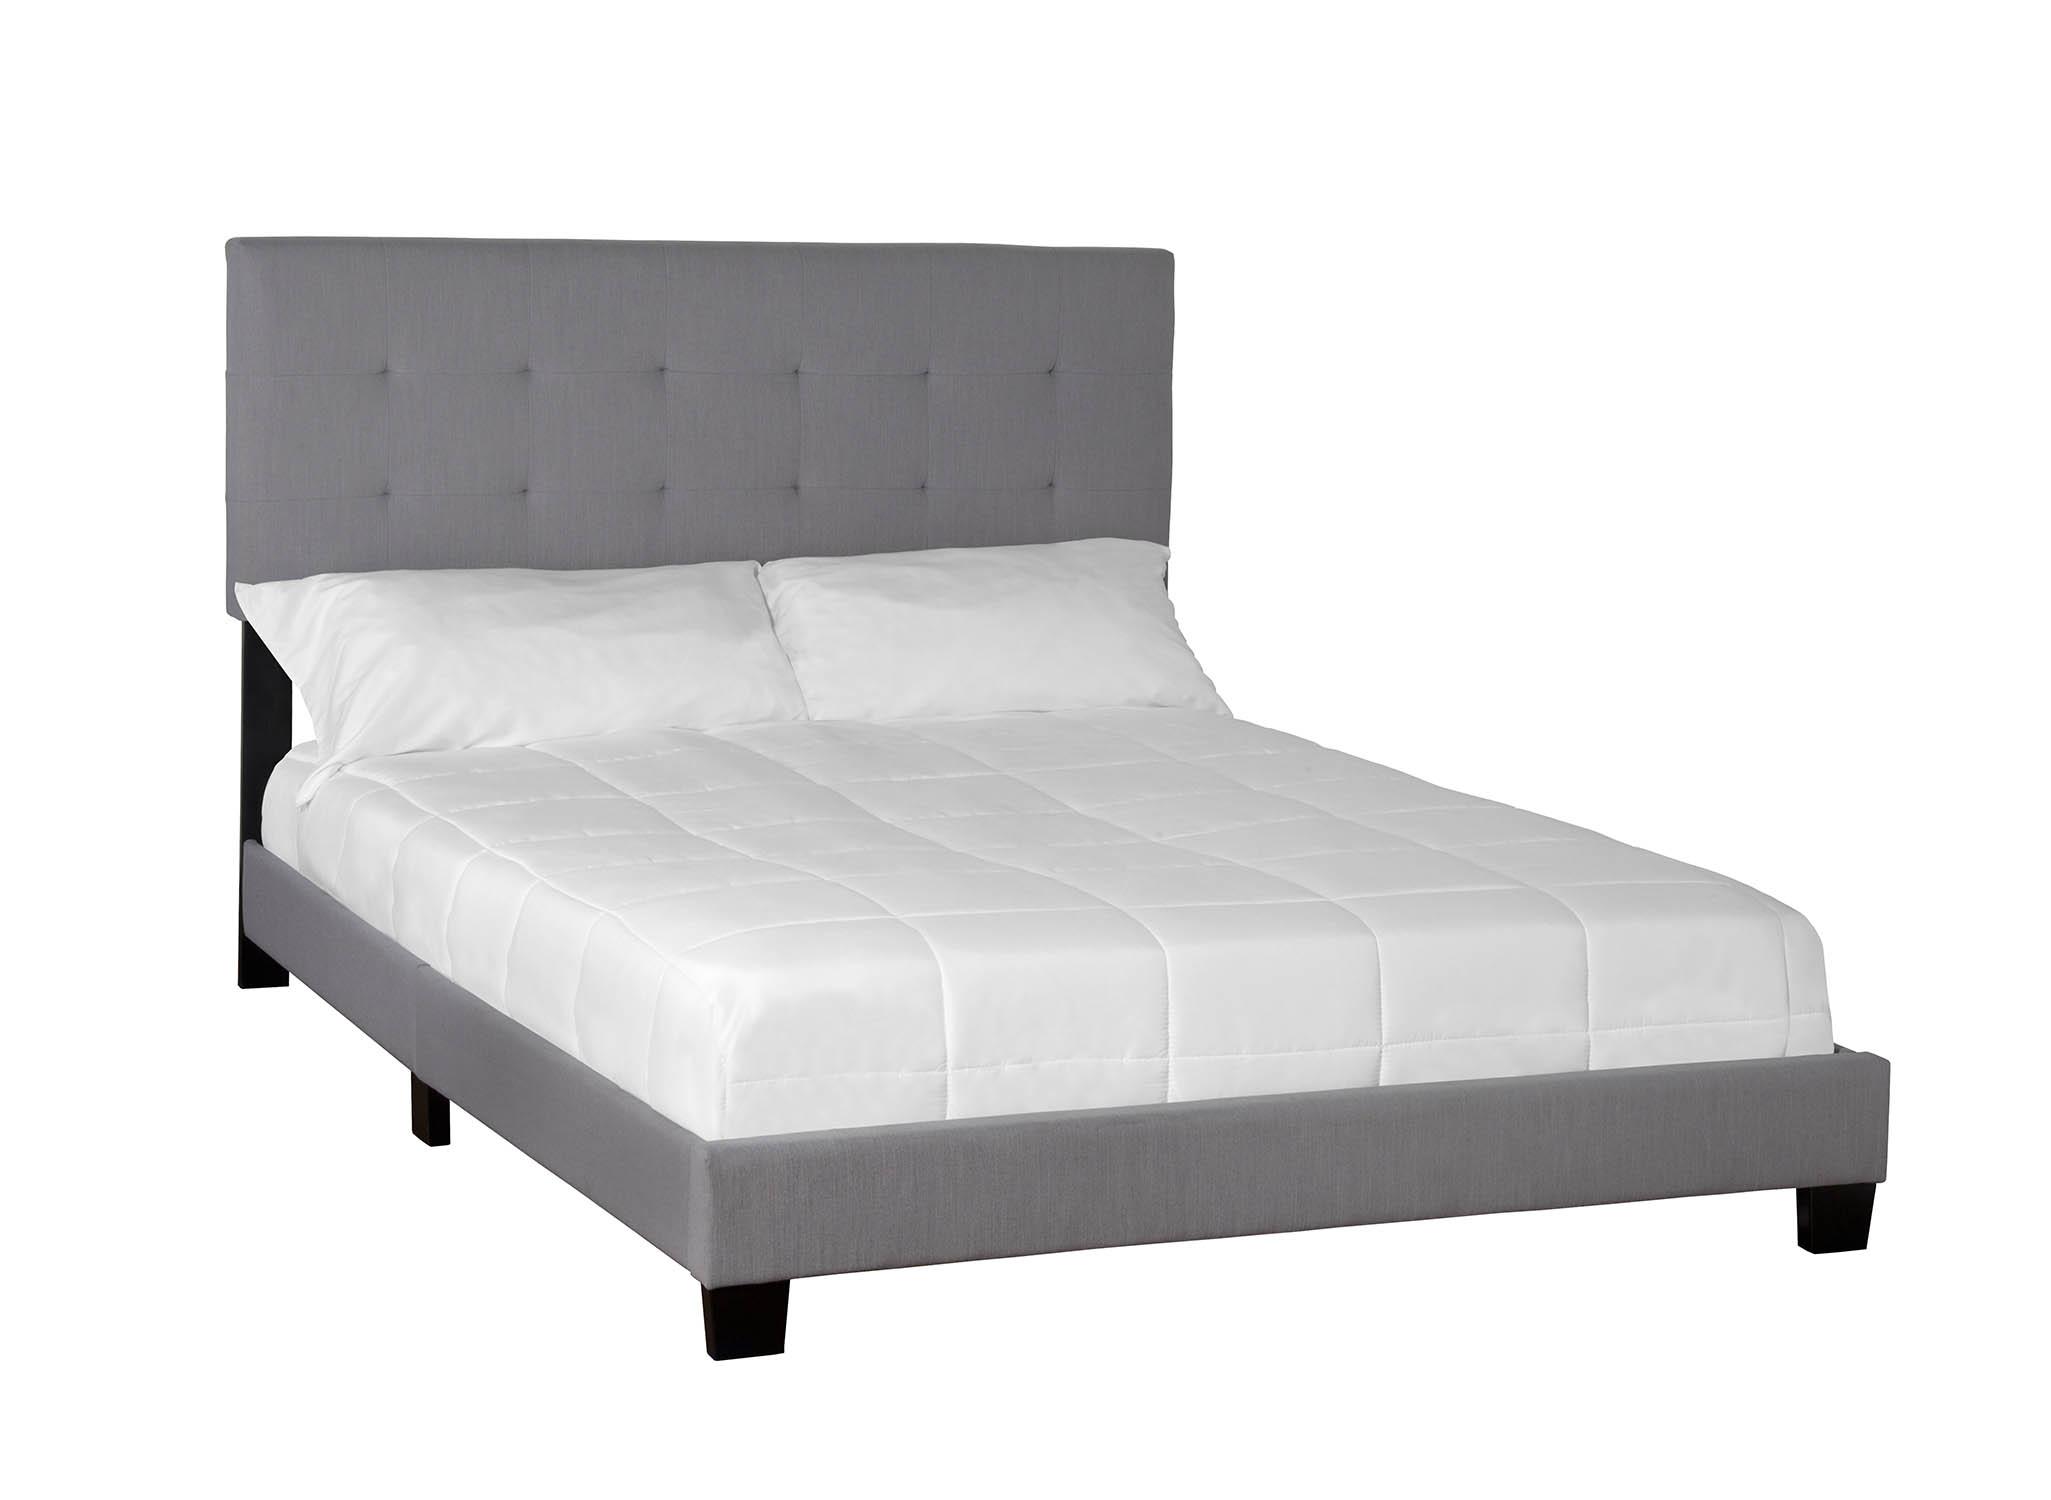 Modern, Transitional Panel Bed EDEN 1600DS-105 1600DS-105 in Gray Fabric